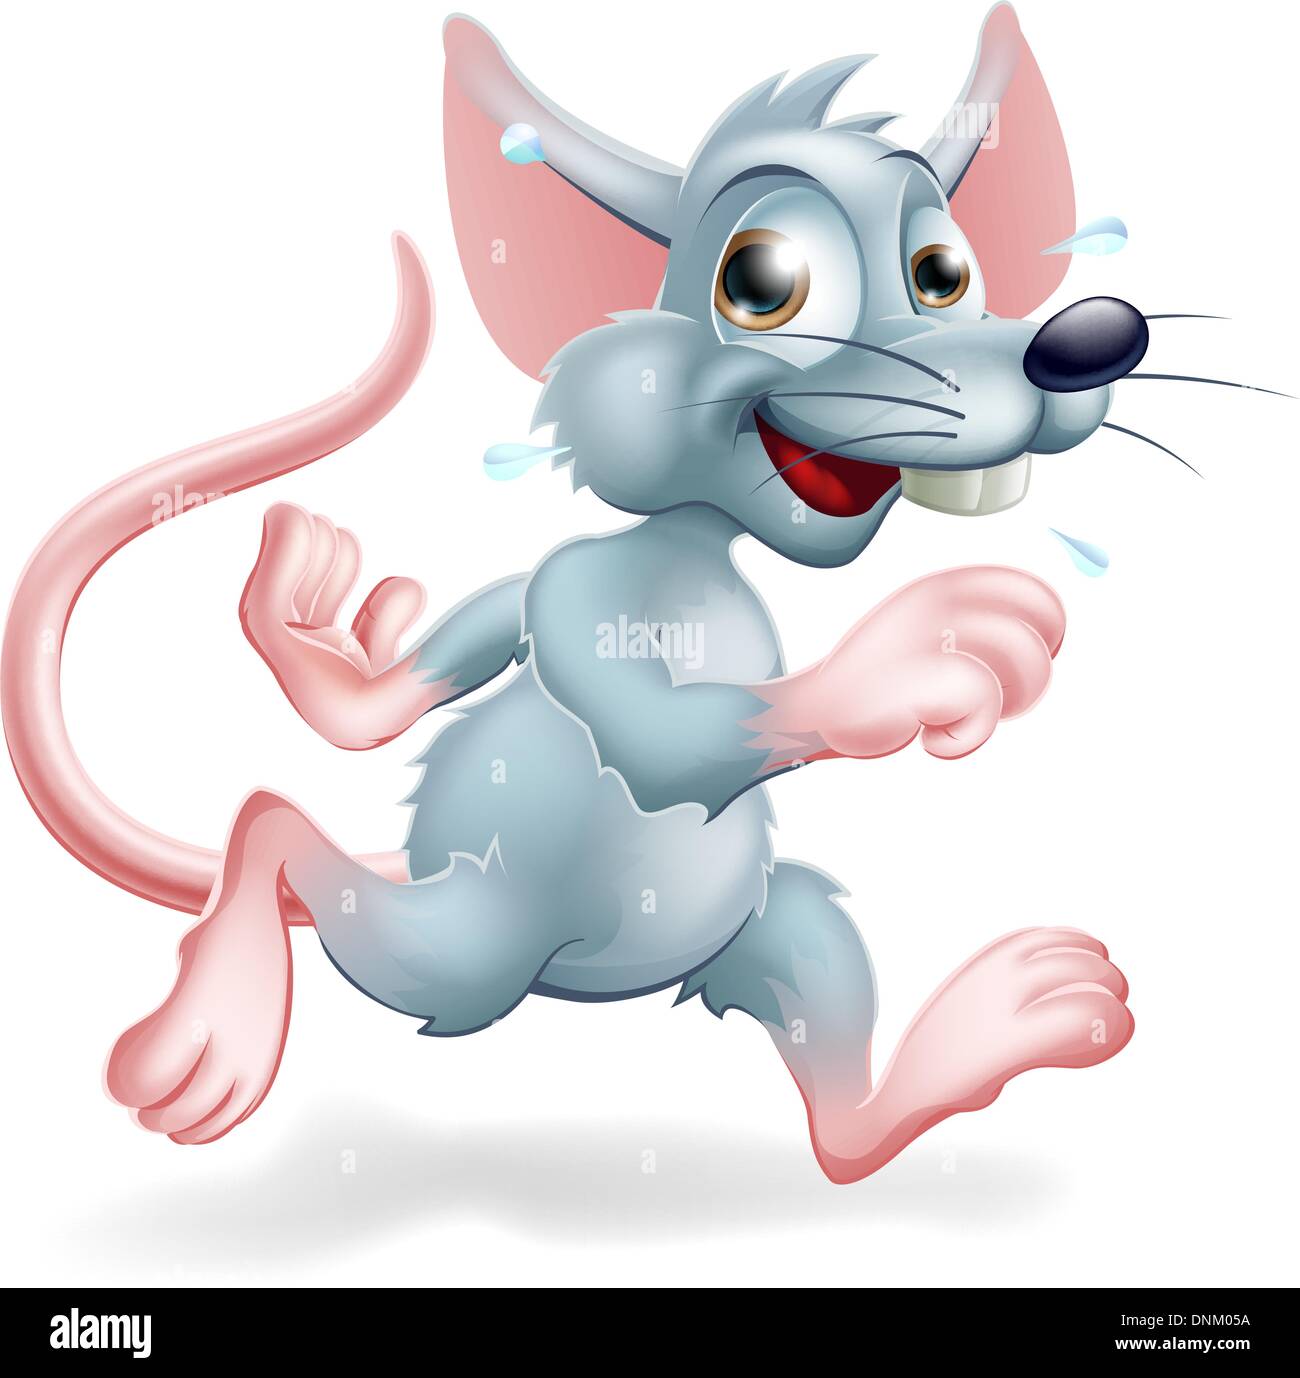 Illustration of a cartoon rat character running, a conceptual illustration for the rat race perhaps. Stock Vector